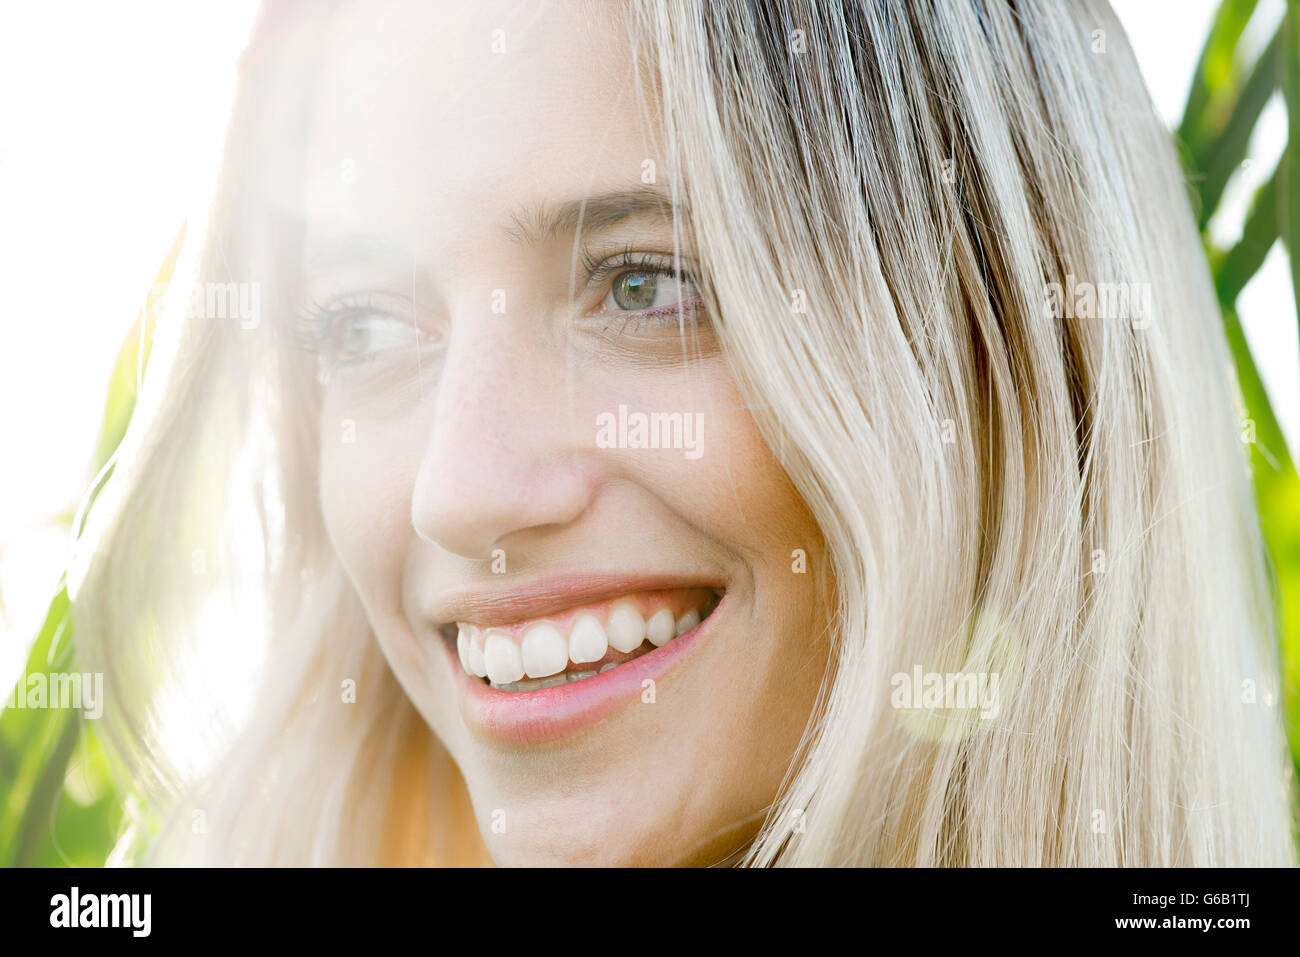 Young woman smiling in thought outdoors Stock Photo